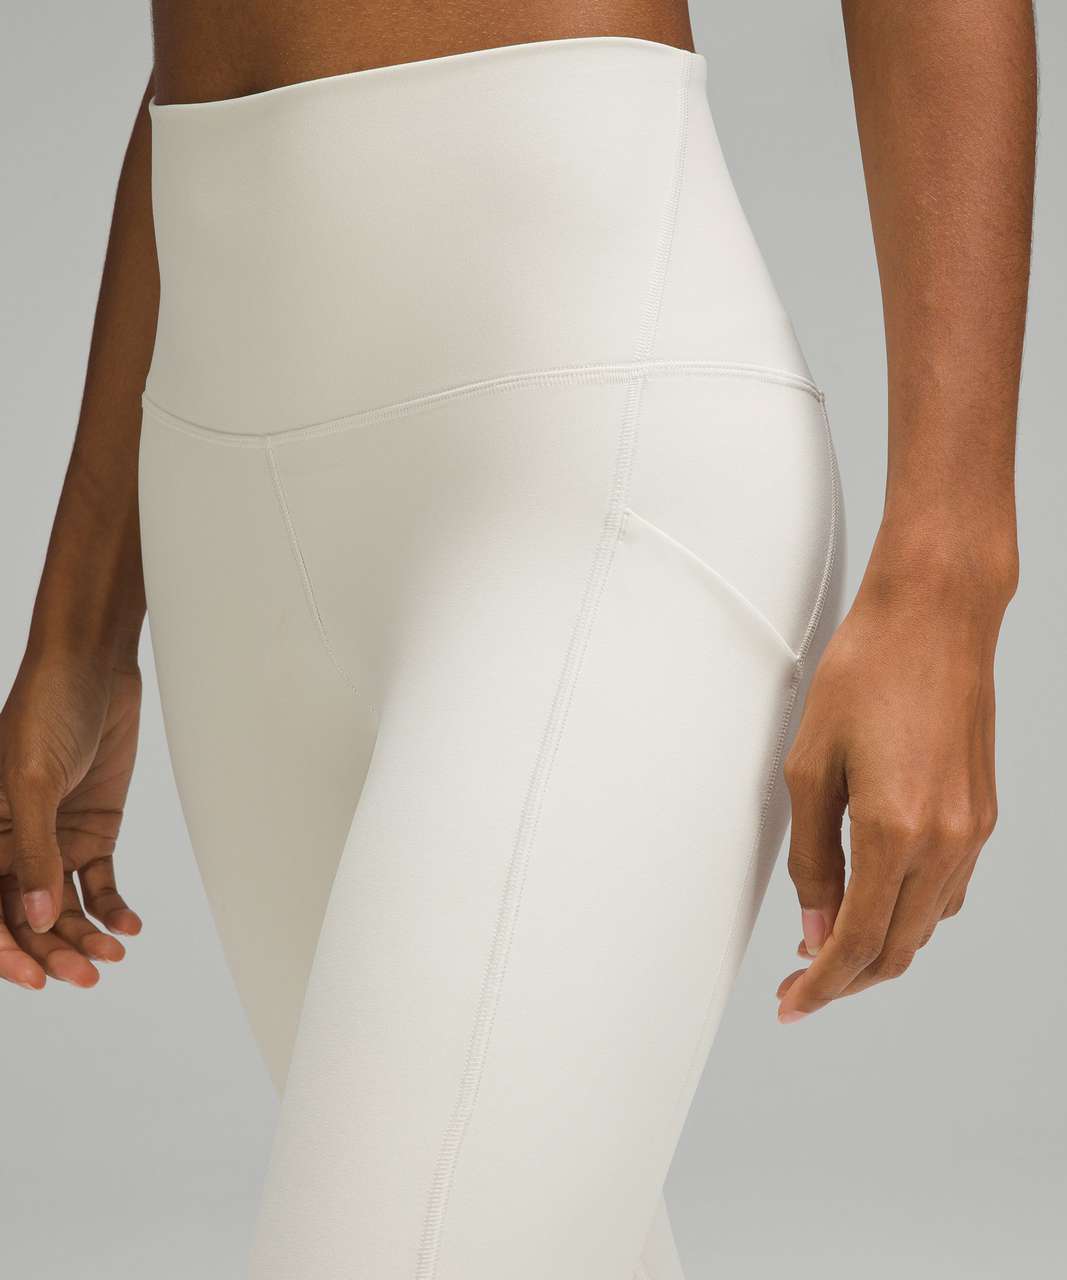 Lululemon Align High Rise Pant with Pockets 25 - Spiced Chai